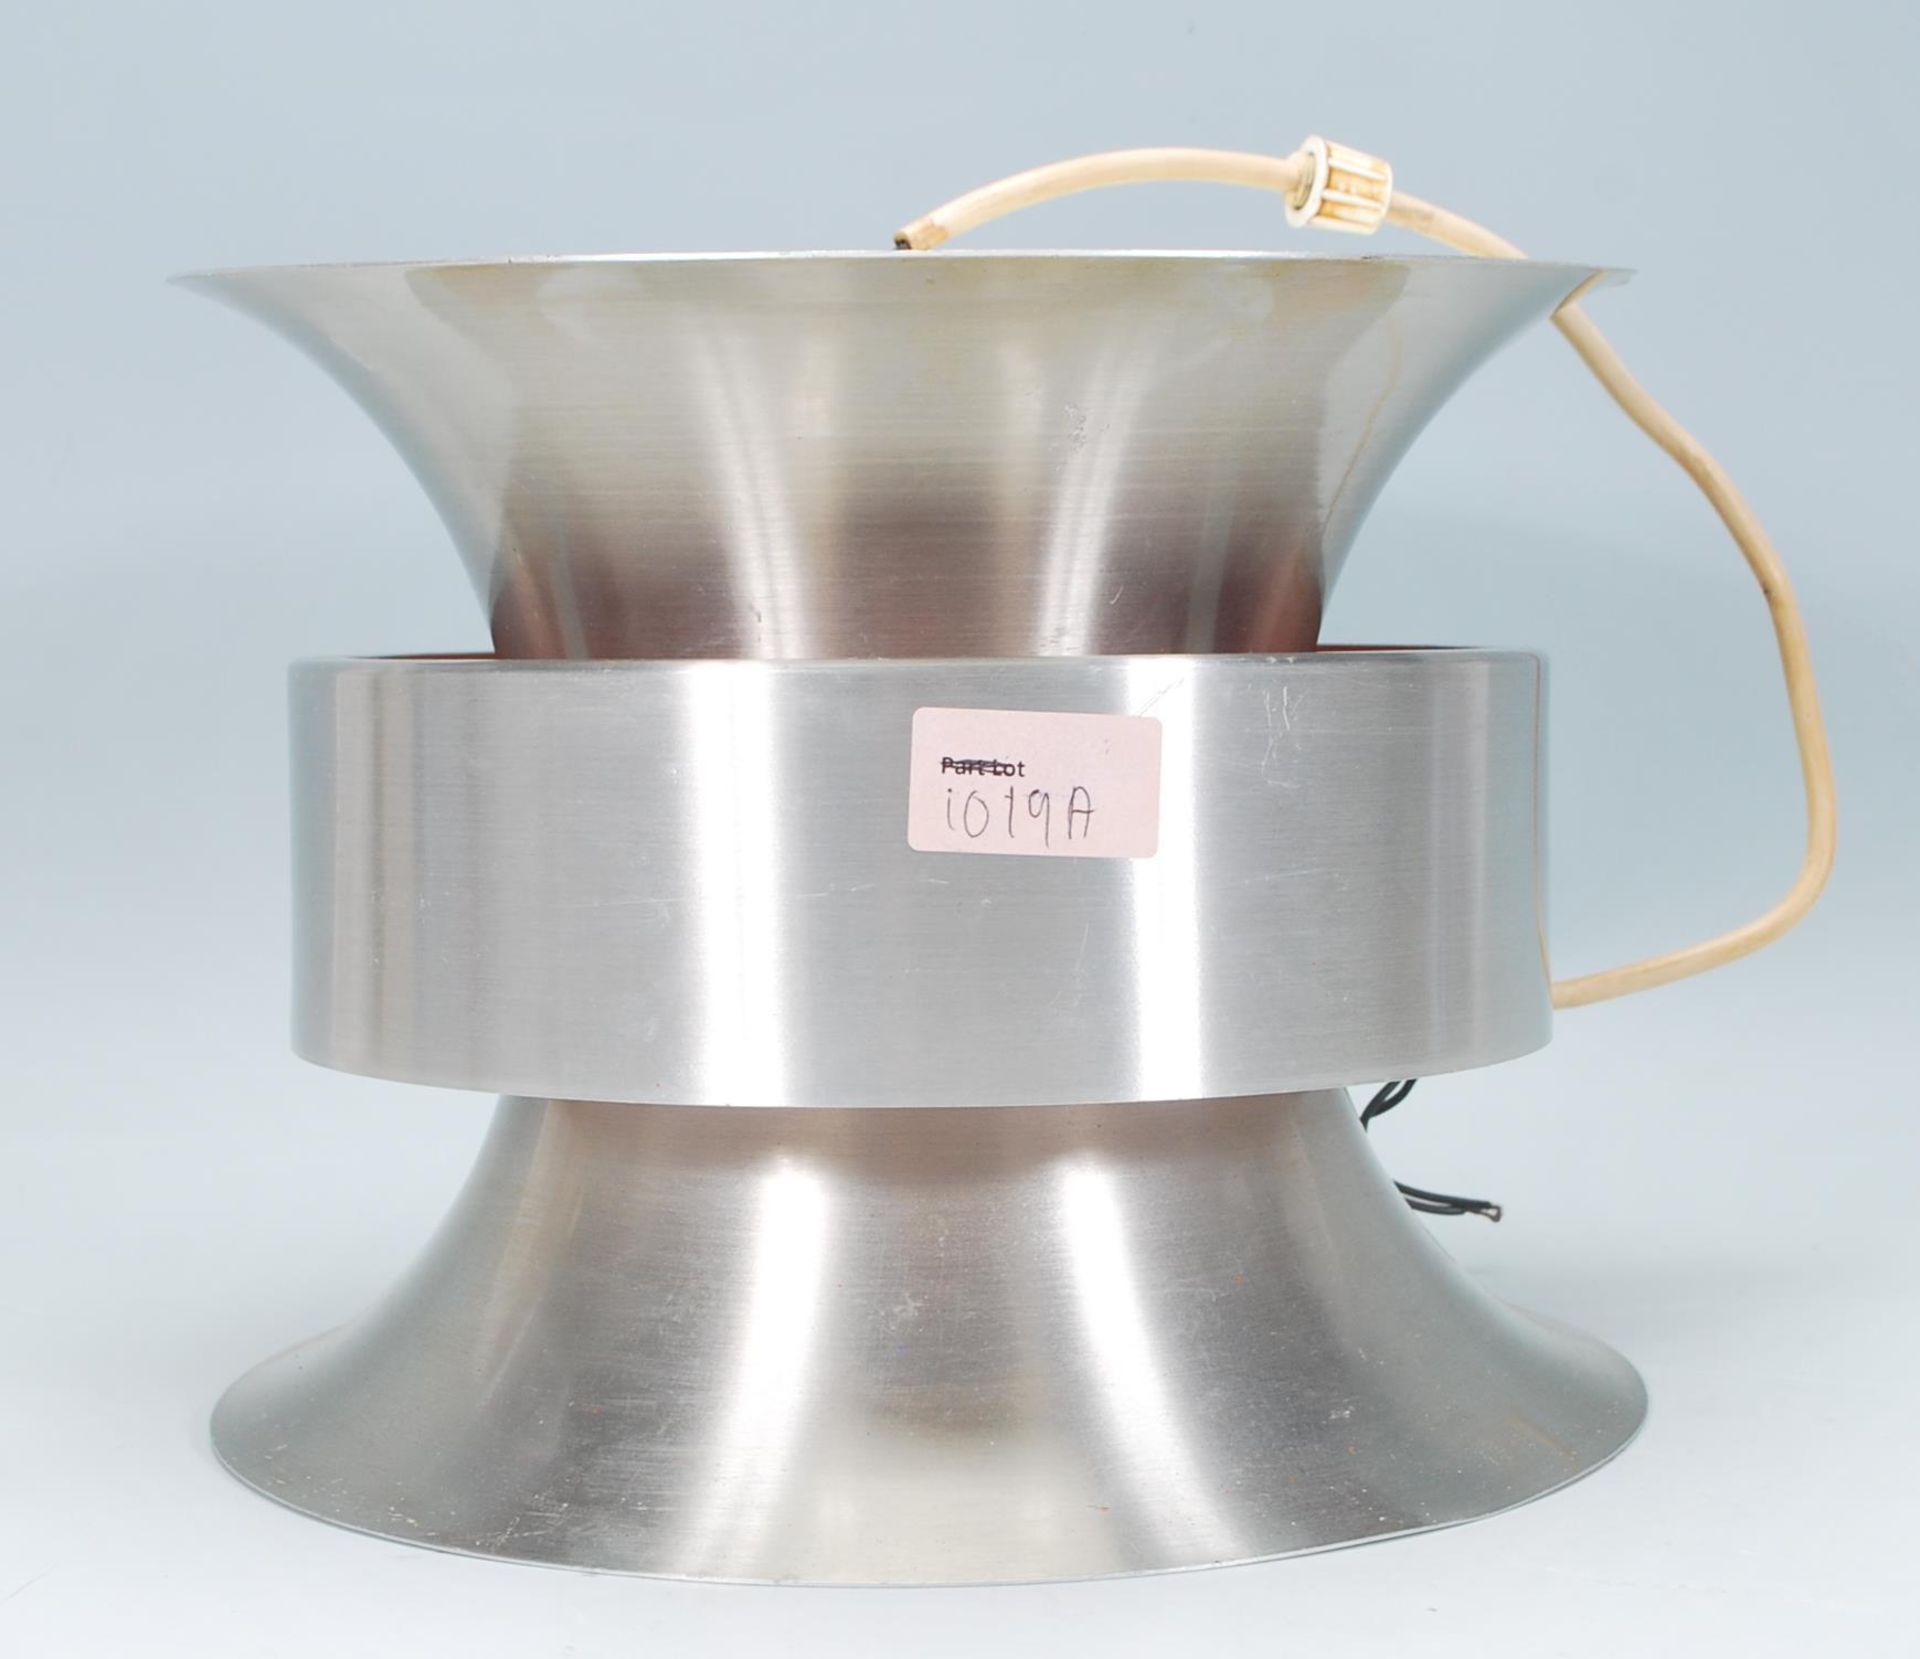 A Danish retro vintage aluminium ceiling light fixture having two trumpeted sections on top of